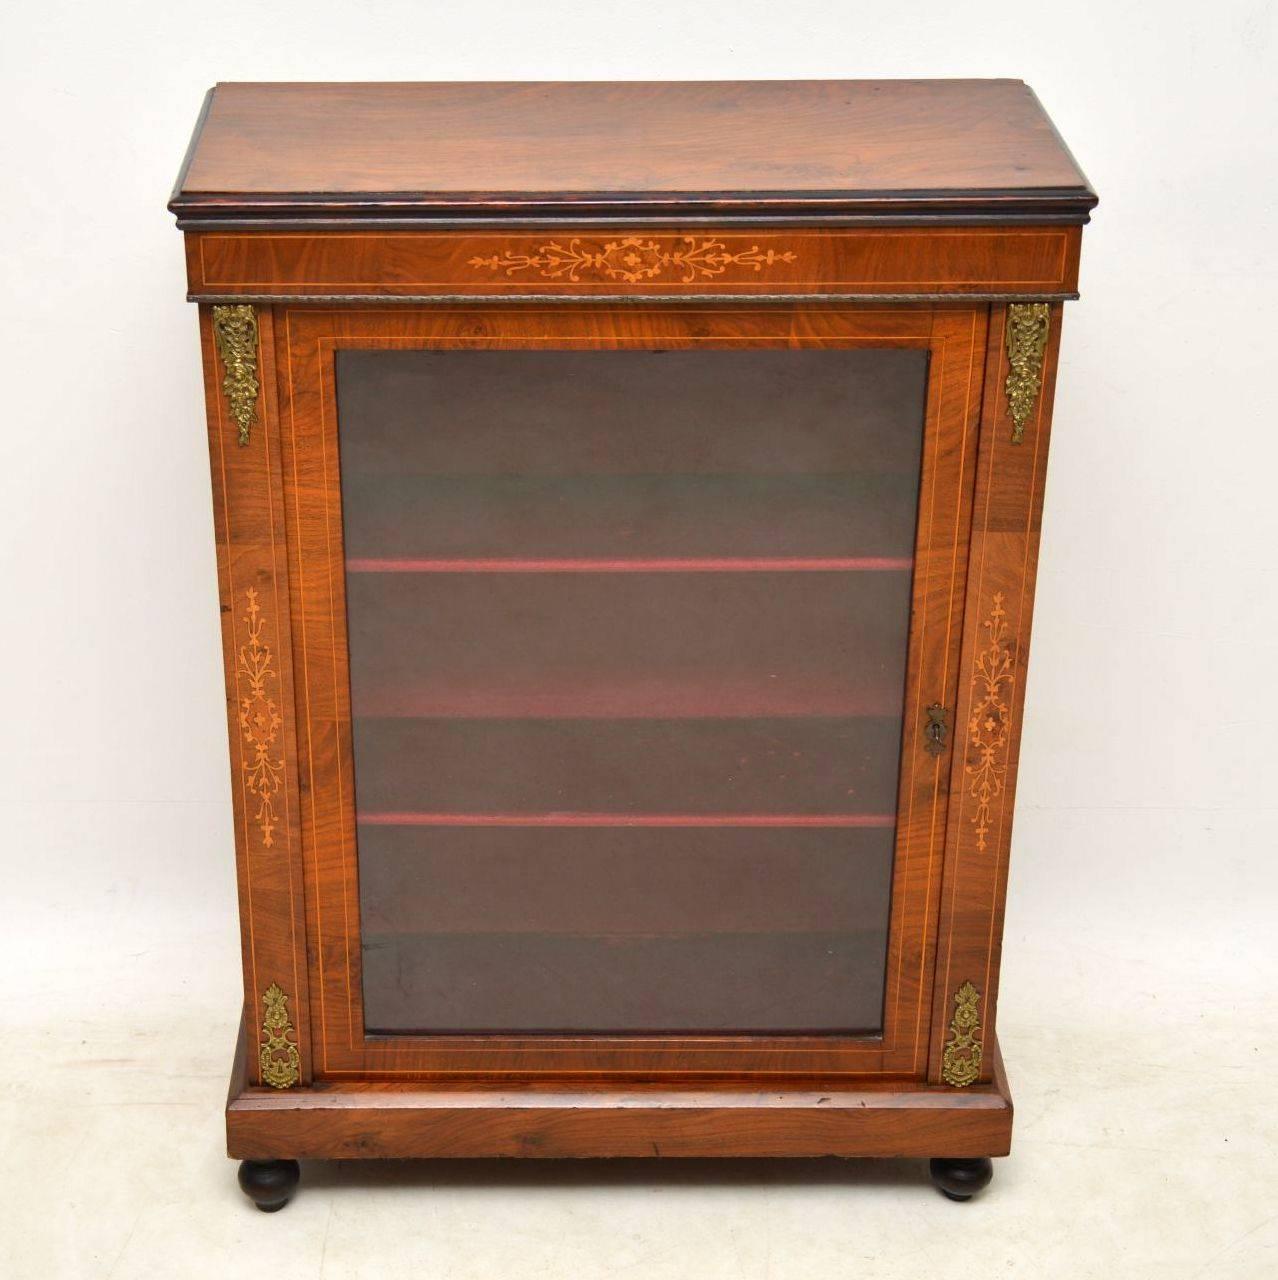 Antique Victorian figured walnut pier cabinet with some nice inlays and in good original condition. It has an ebonized top edge, a gilt metal beading and gilt metal appliqués top and bottom. The inside is lined and it sits on turned feet. These